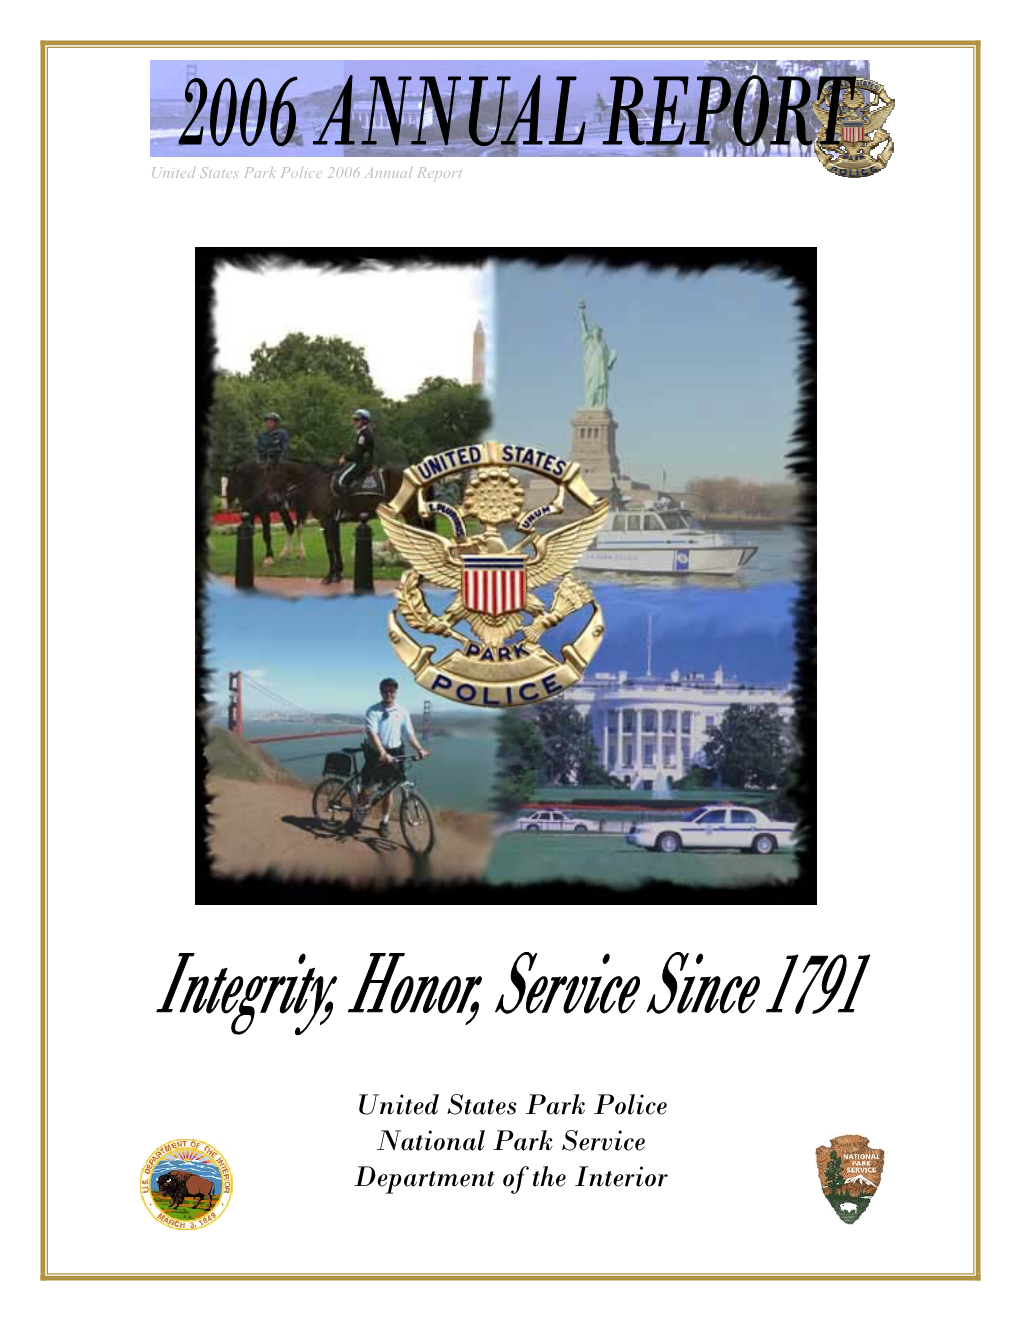 United States Park Police National Park Service Department of the Interior